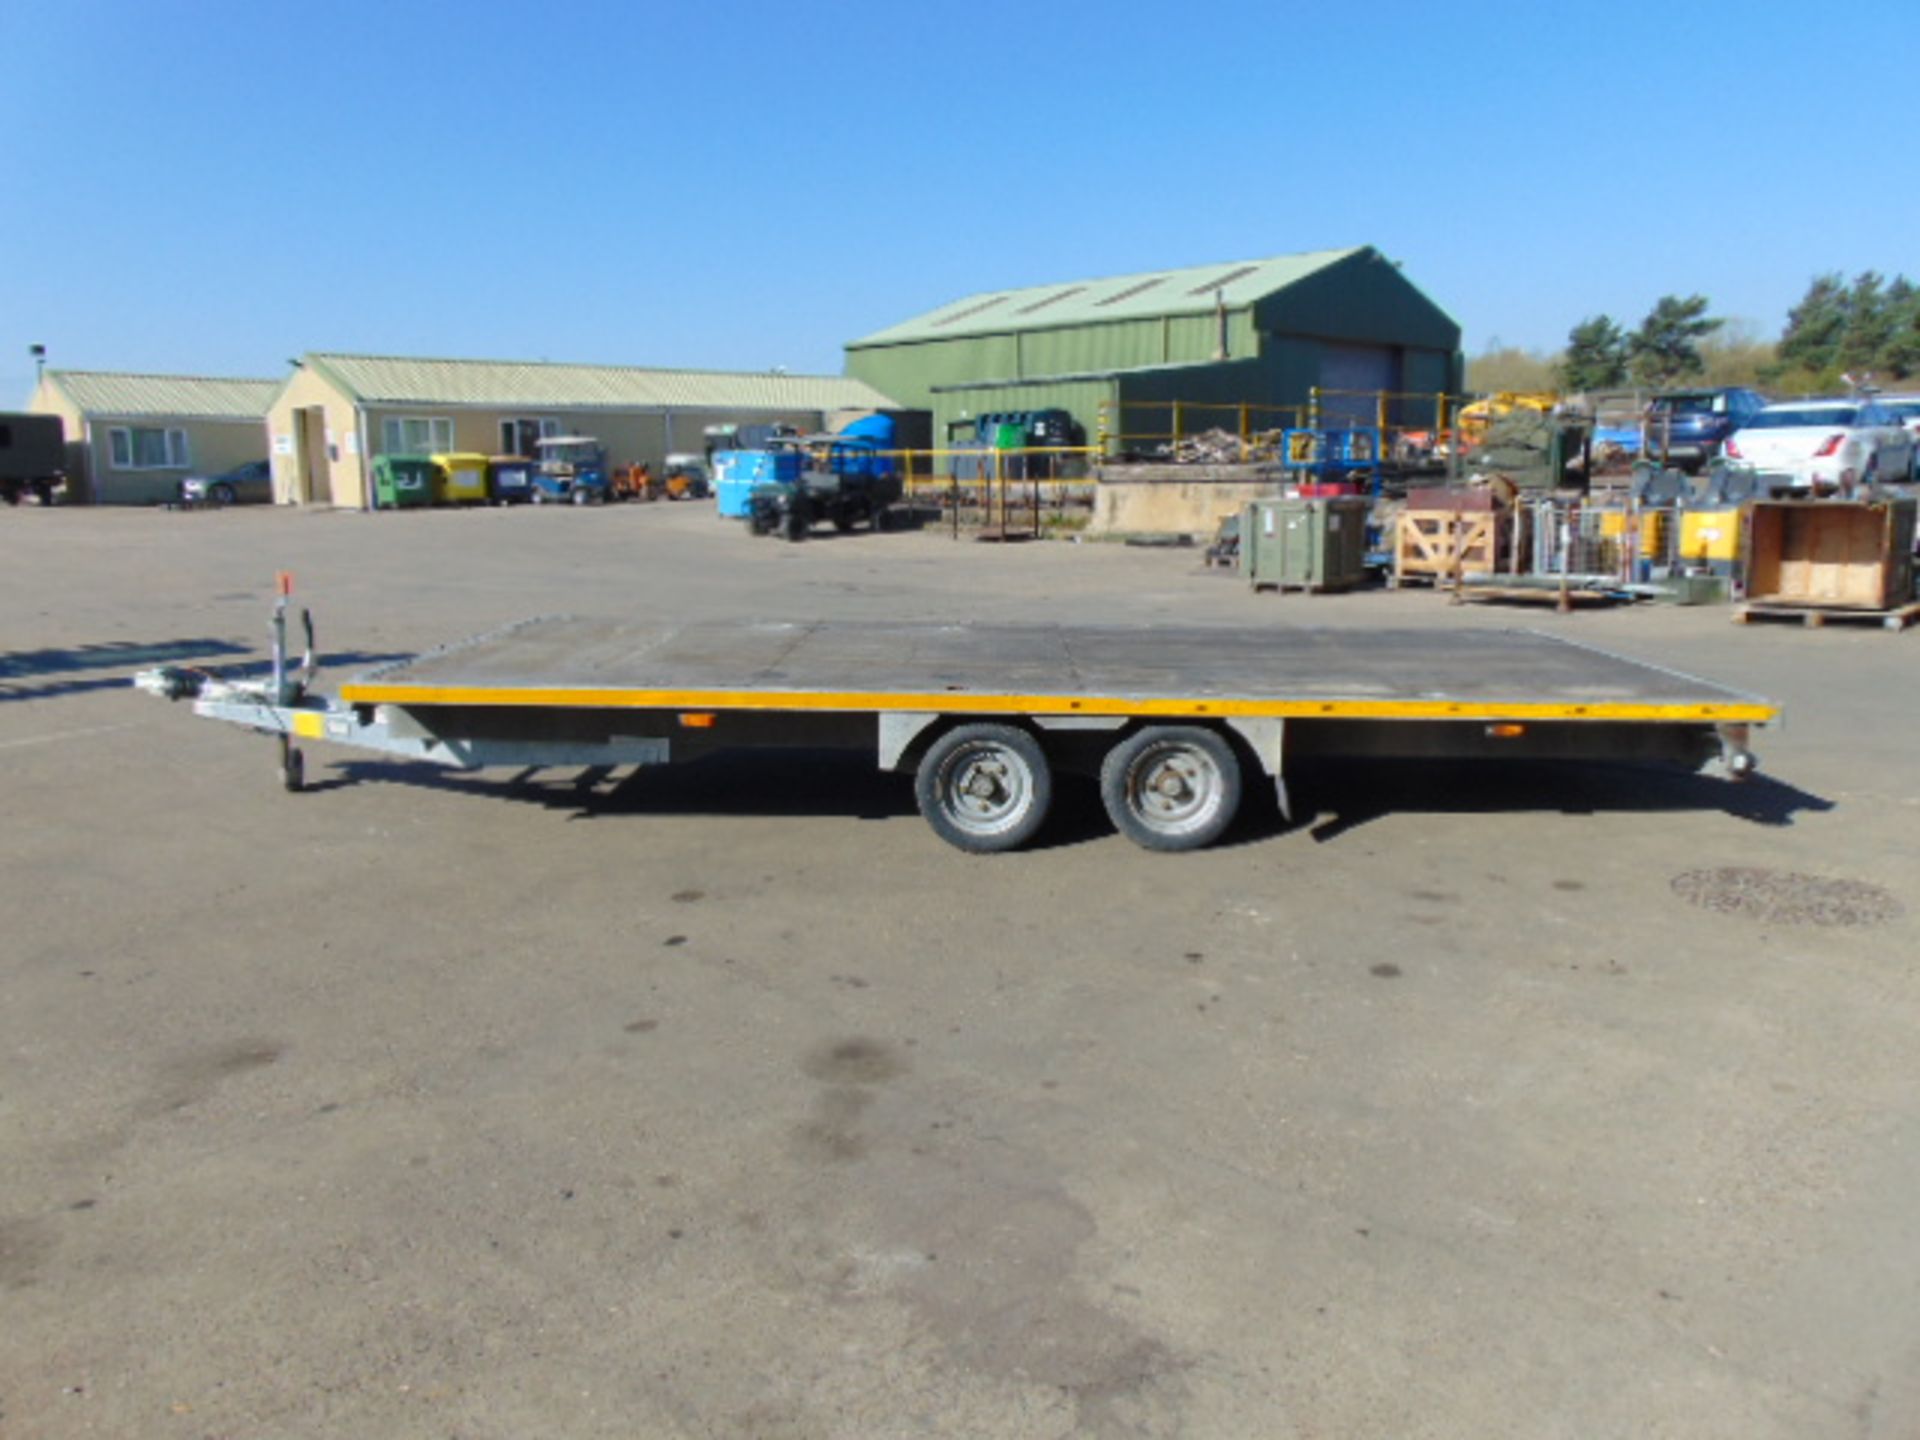 Very High Specification Bateson Twin Axle Flatbed 3.5 Tonne Transporter Trailer with Ramps - Image 4 of 16